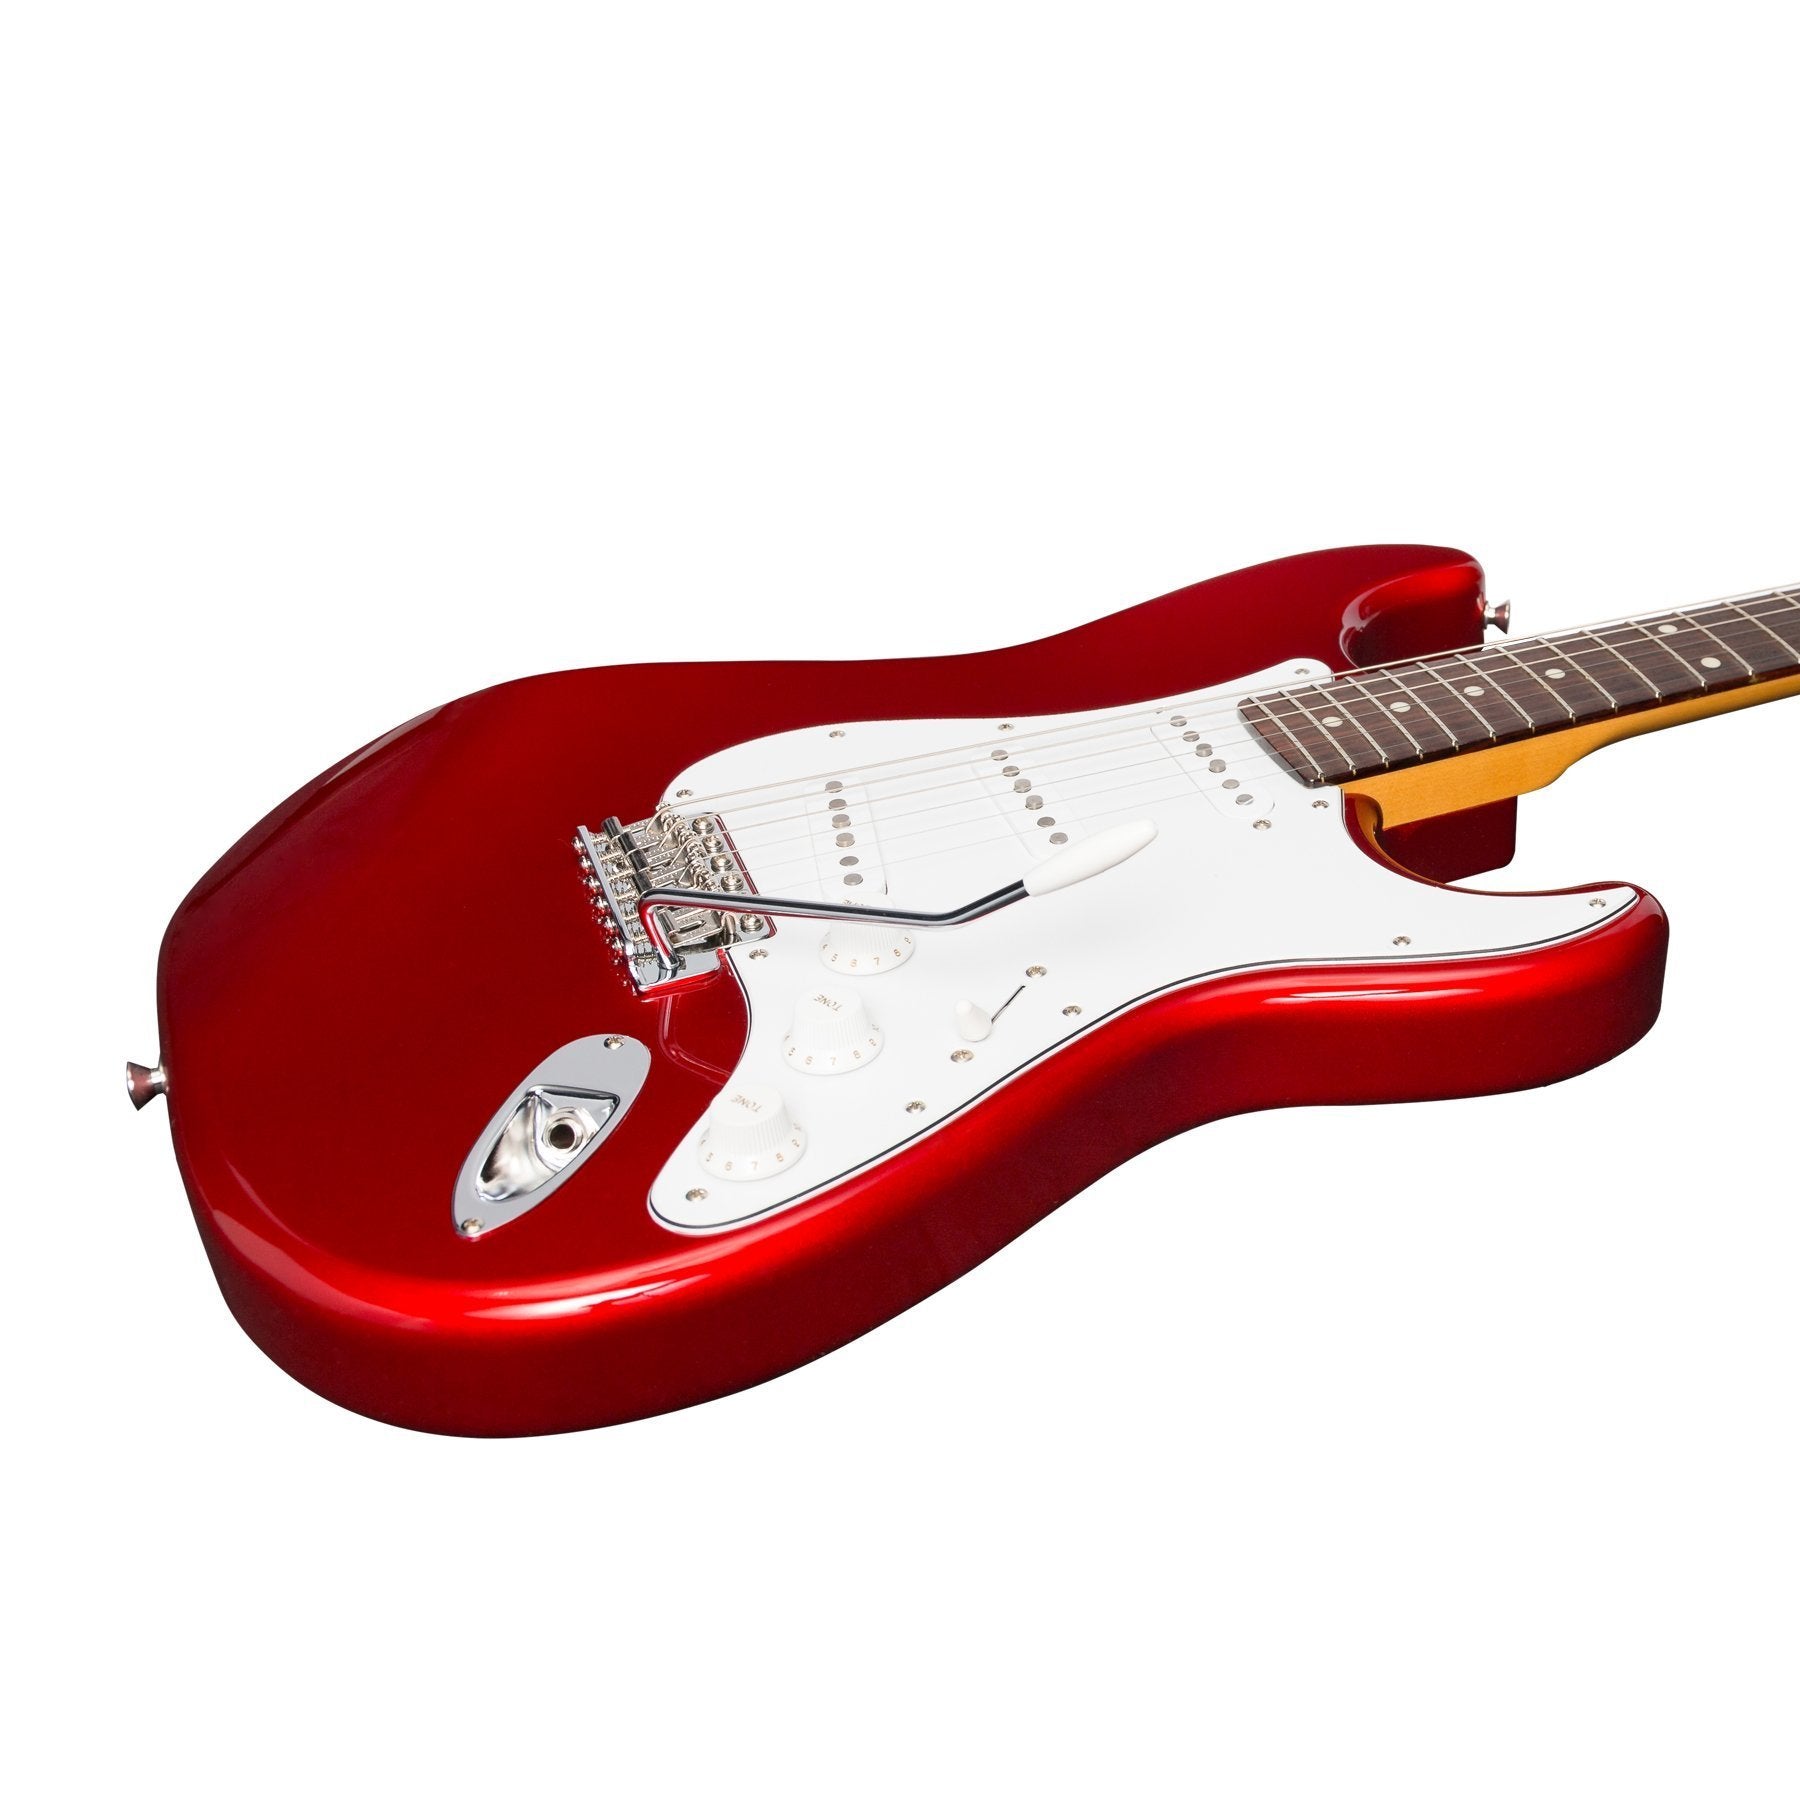 Tokai AST104-OCR Electric Guitar, Vintage Series, Old Candy Apple Red